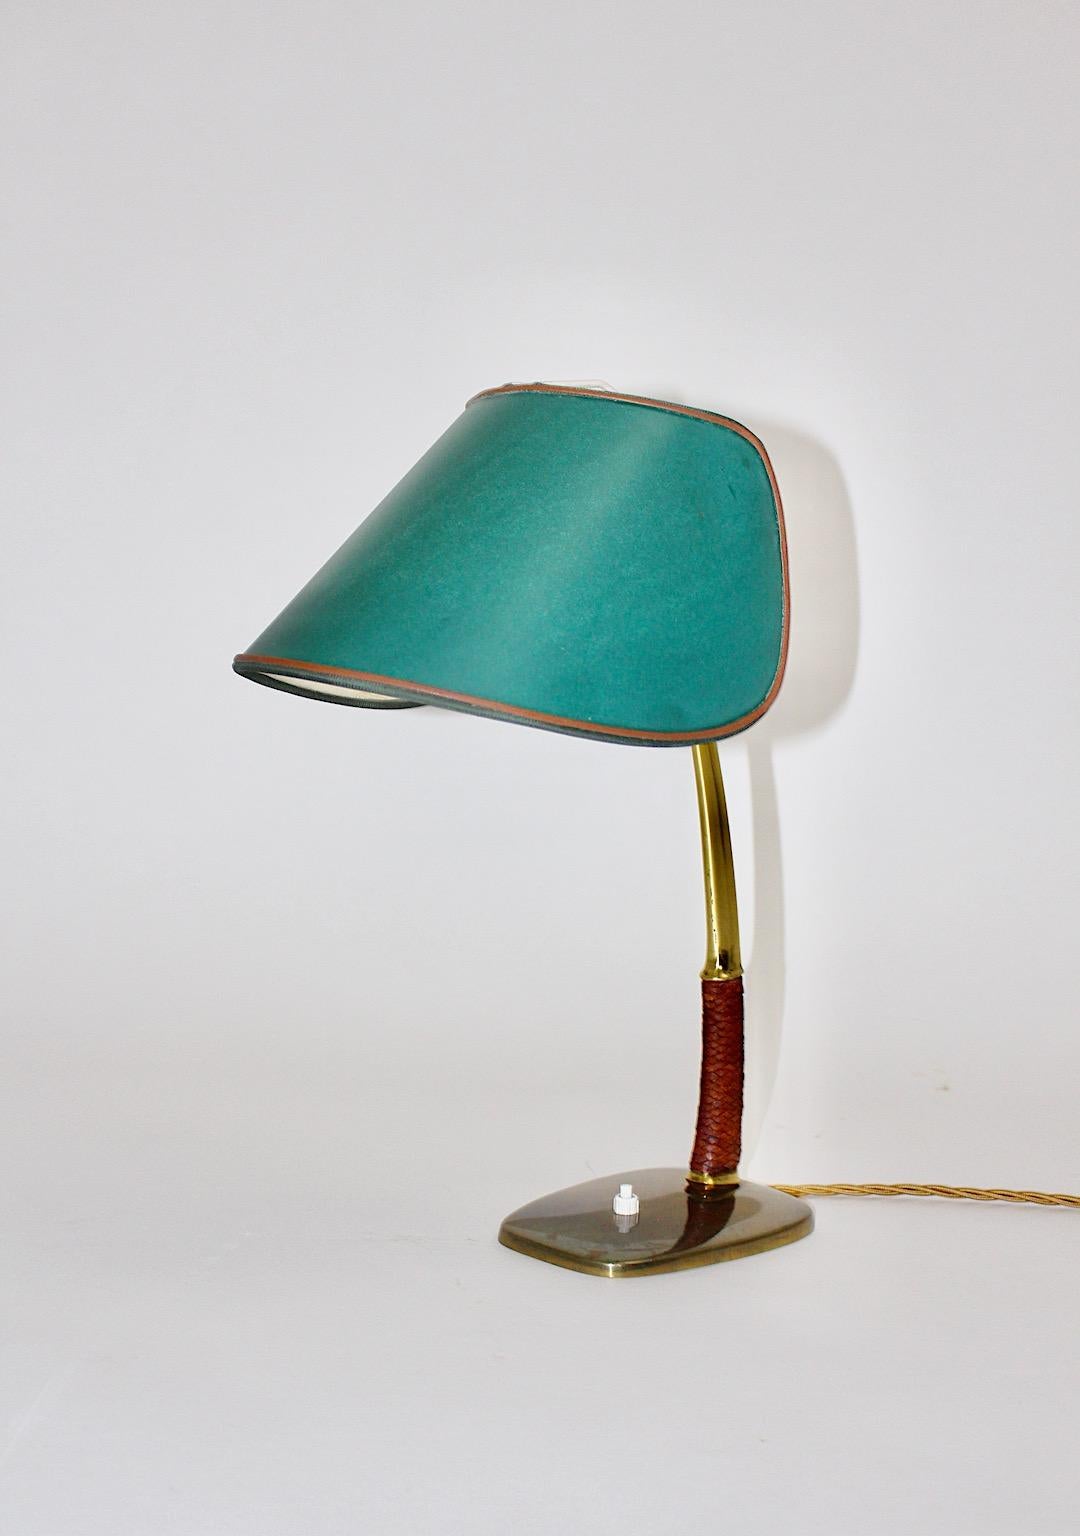 Mid-Century Modern vintage table lamp or desk lamp from brass, leather and nickel plated metal Mod. 1191 Arnold which was designed and manufactured by Kalmar in Vienna 1950s.
This rare table lamp shows a braided leather grip and and an adjustable